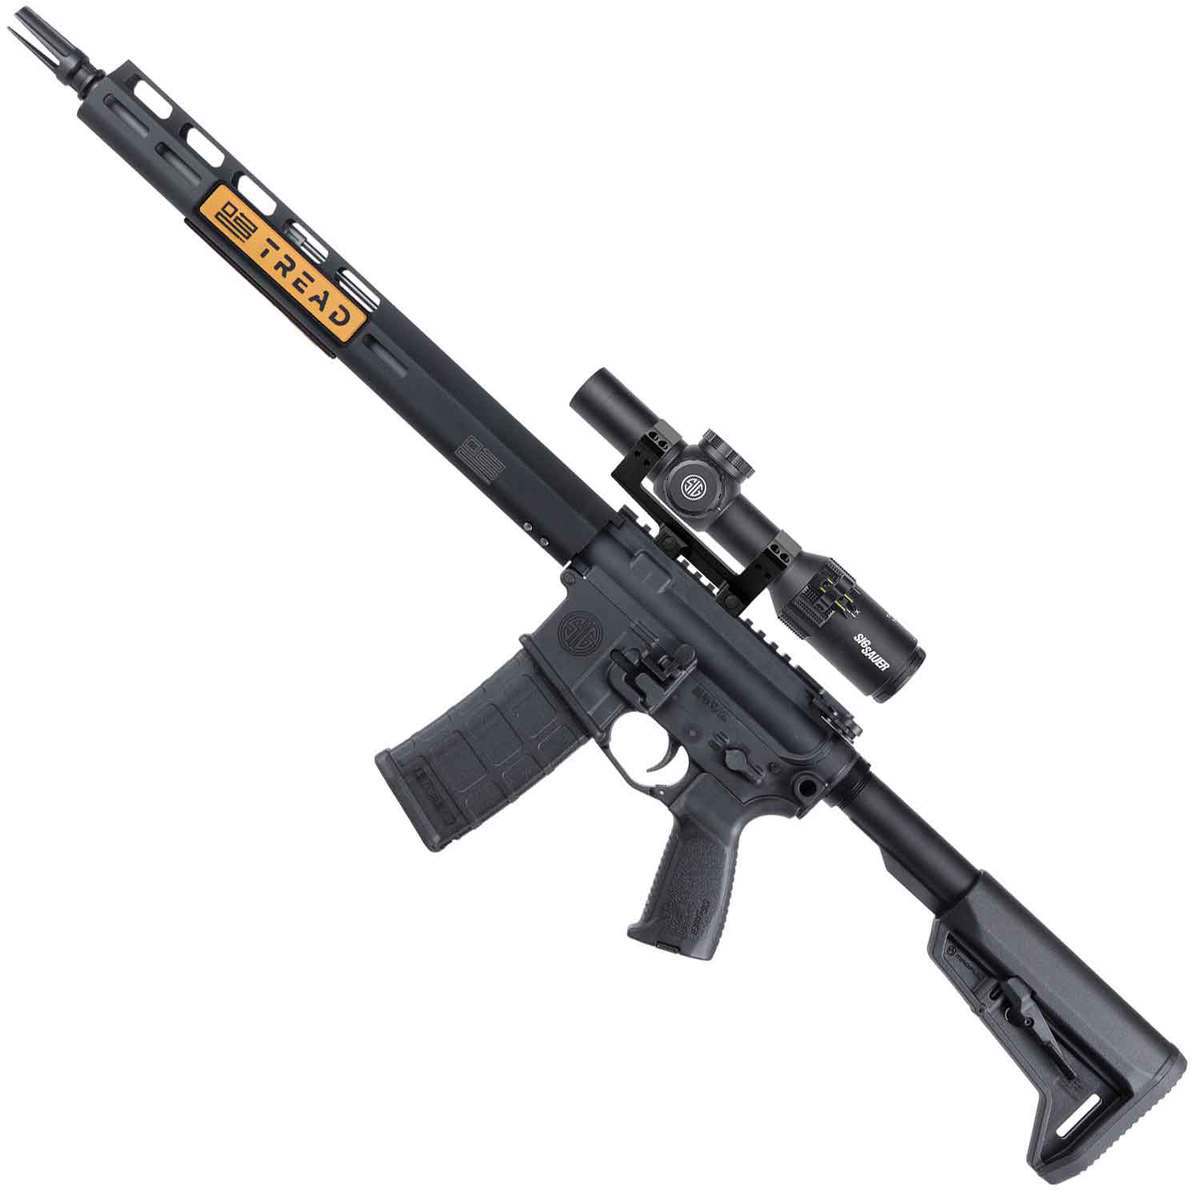 Sig Sauer M400 Tread With Tango 4 Scope 5.56mm NATO 16in Black Semi Automatic Modern Sporting Rifle - 10+1 Rounds | Sportsman's Warehouse